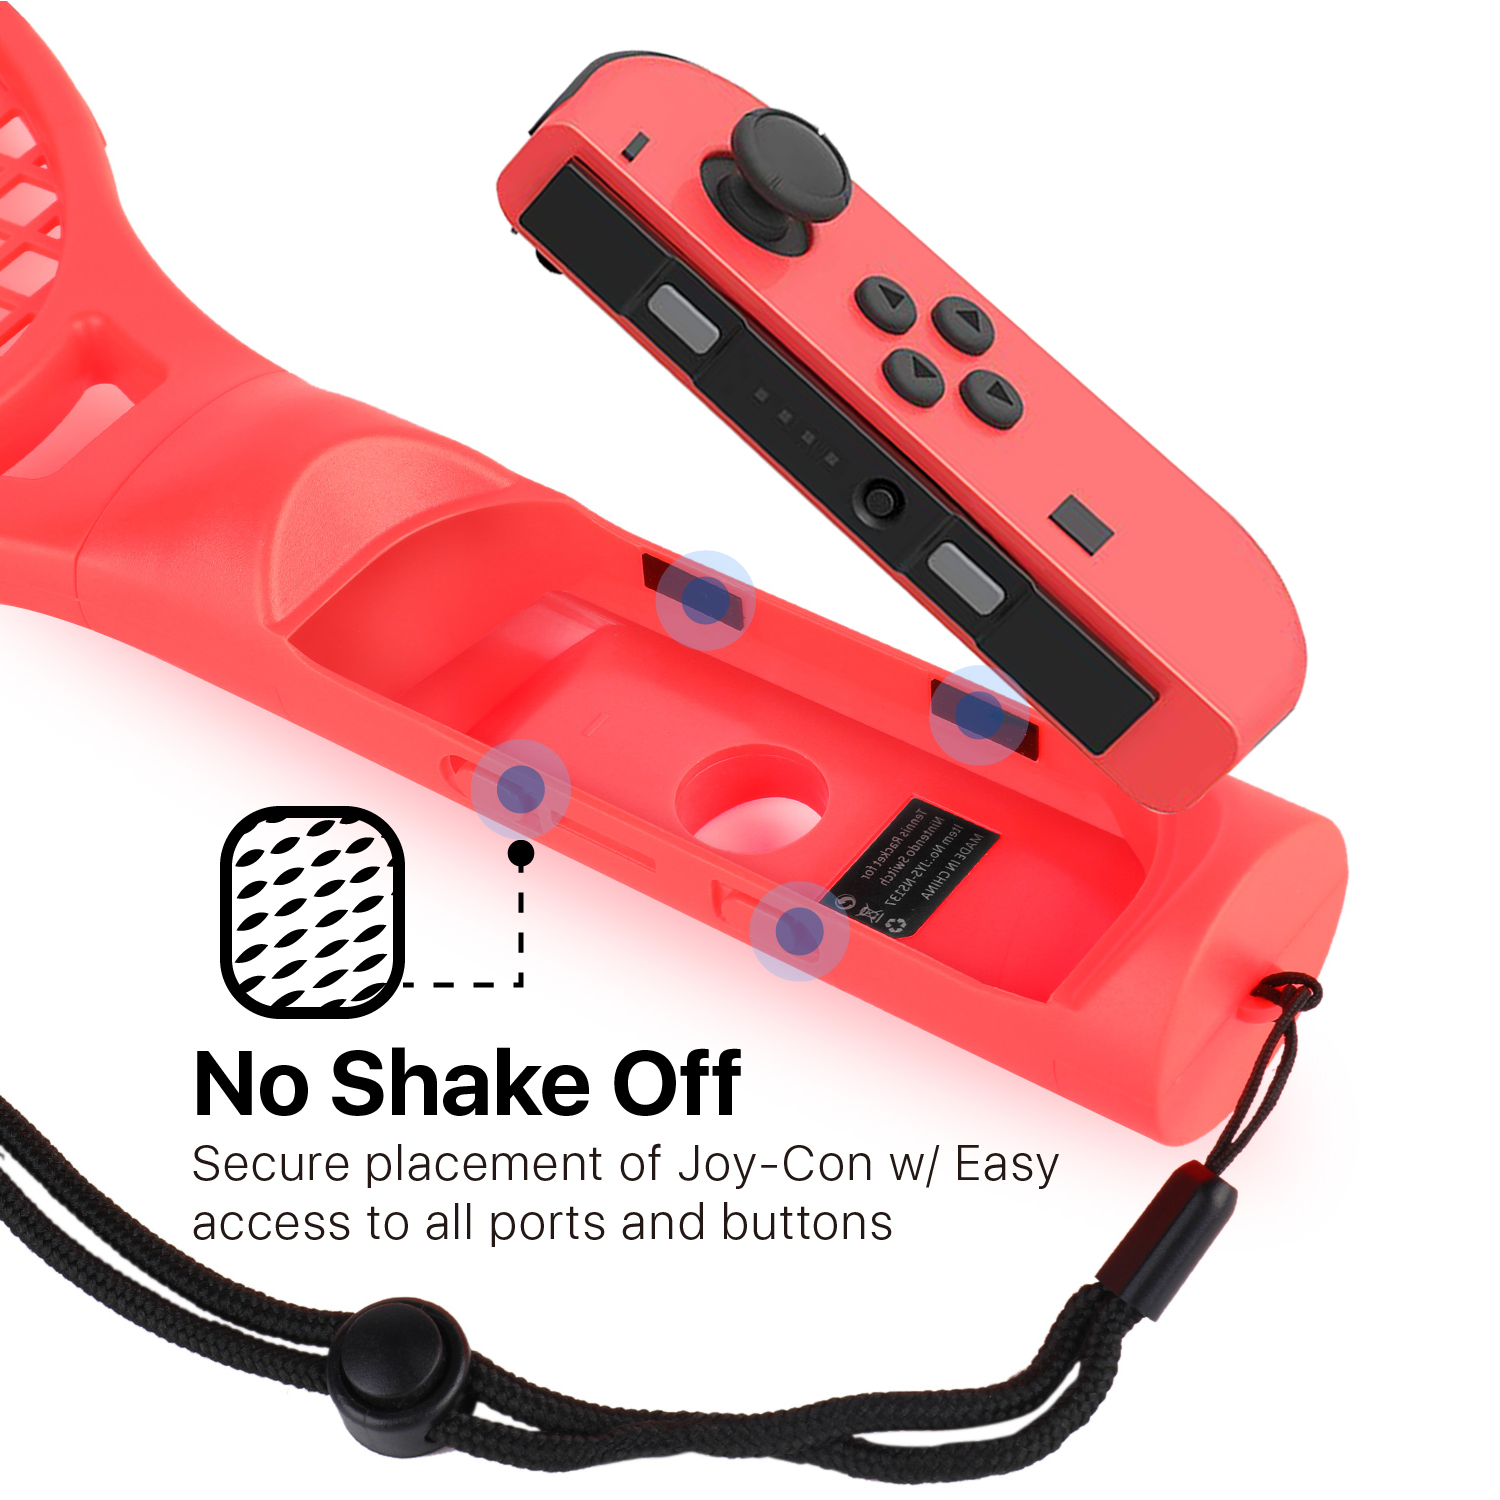 Tennis Racket for Nintendo Switch Joy-Con Controller with Wrist Strap, Joy-Con Racket Accessories Twin Pack for Nintendo Switch Game Mario Tennis Aces Blue and Red